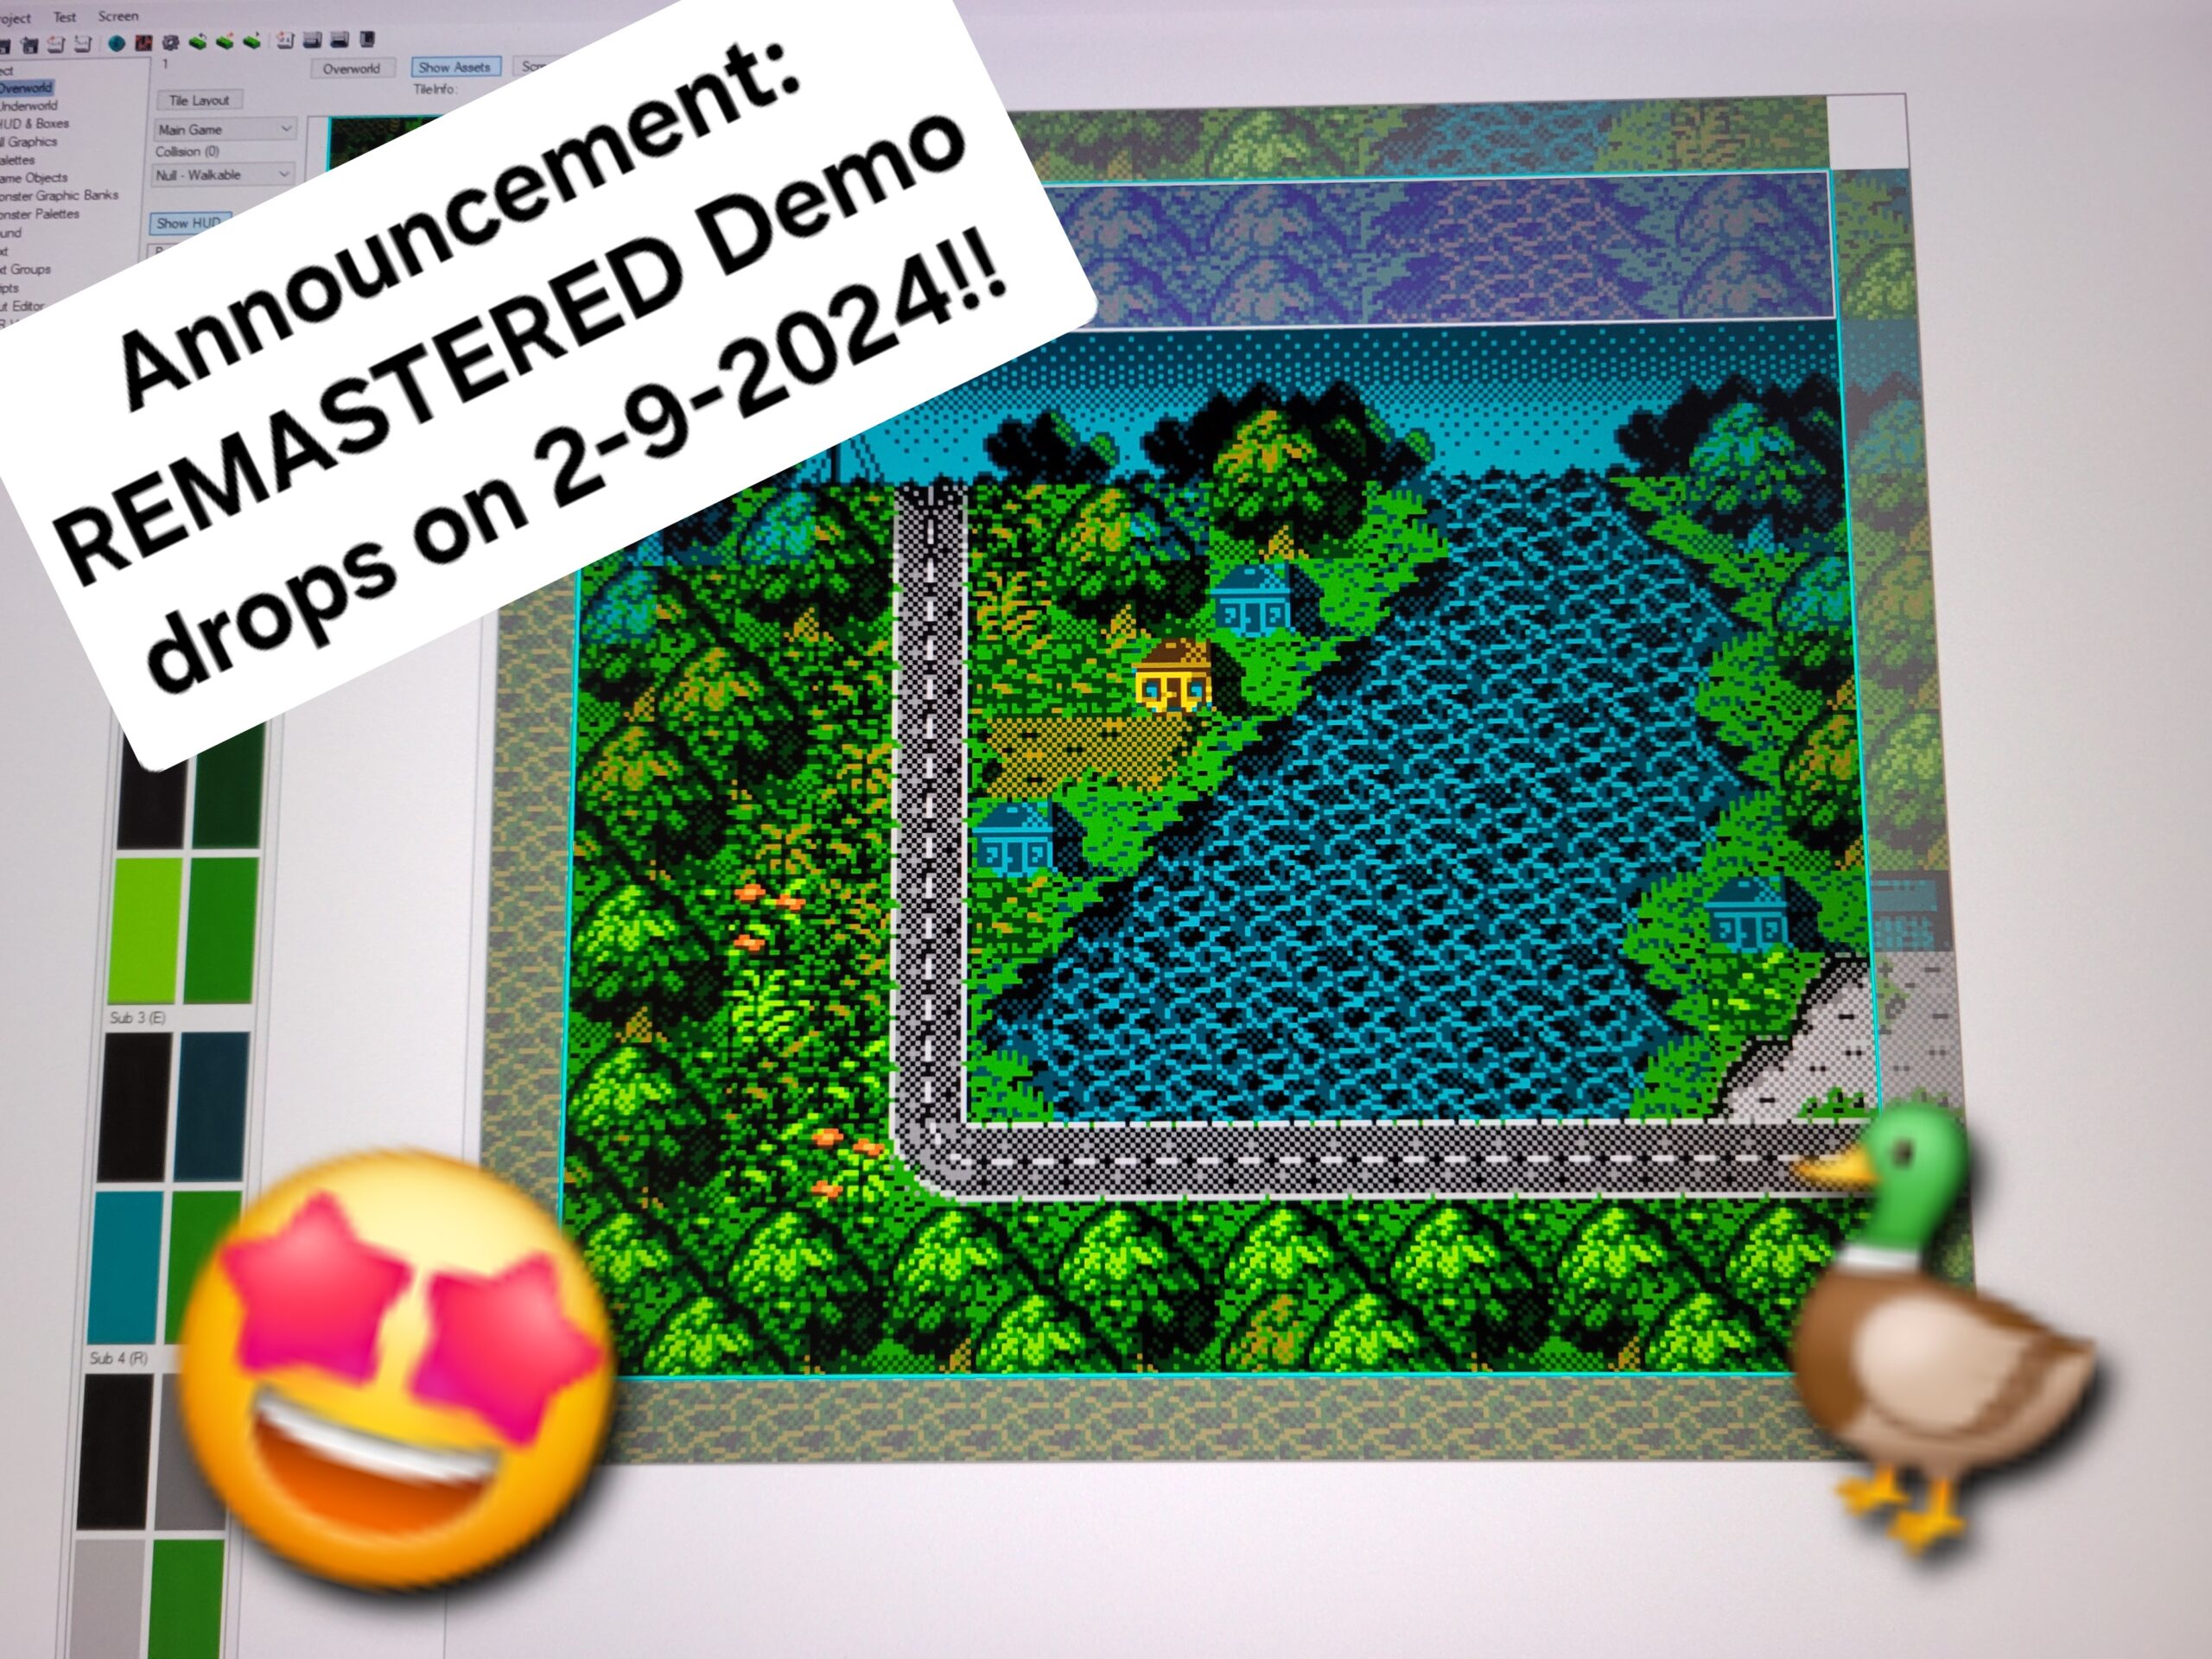 Announcement: REMASTERED Demo drops on 2-9-2024!